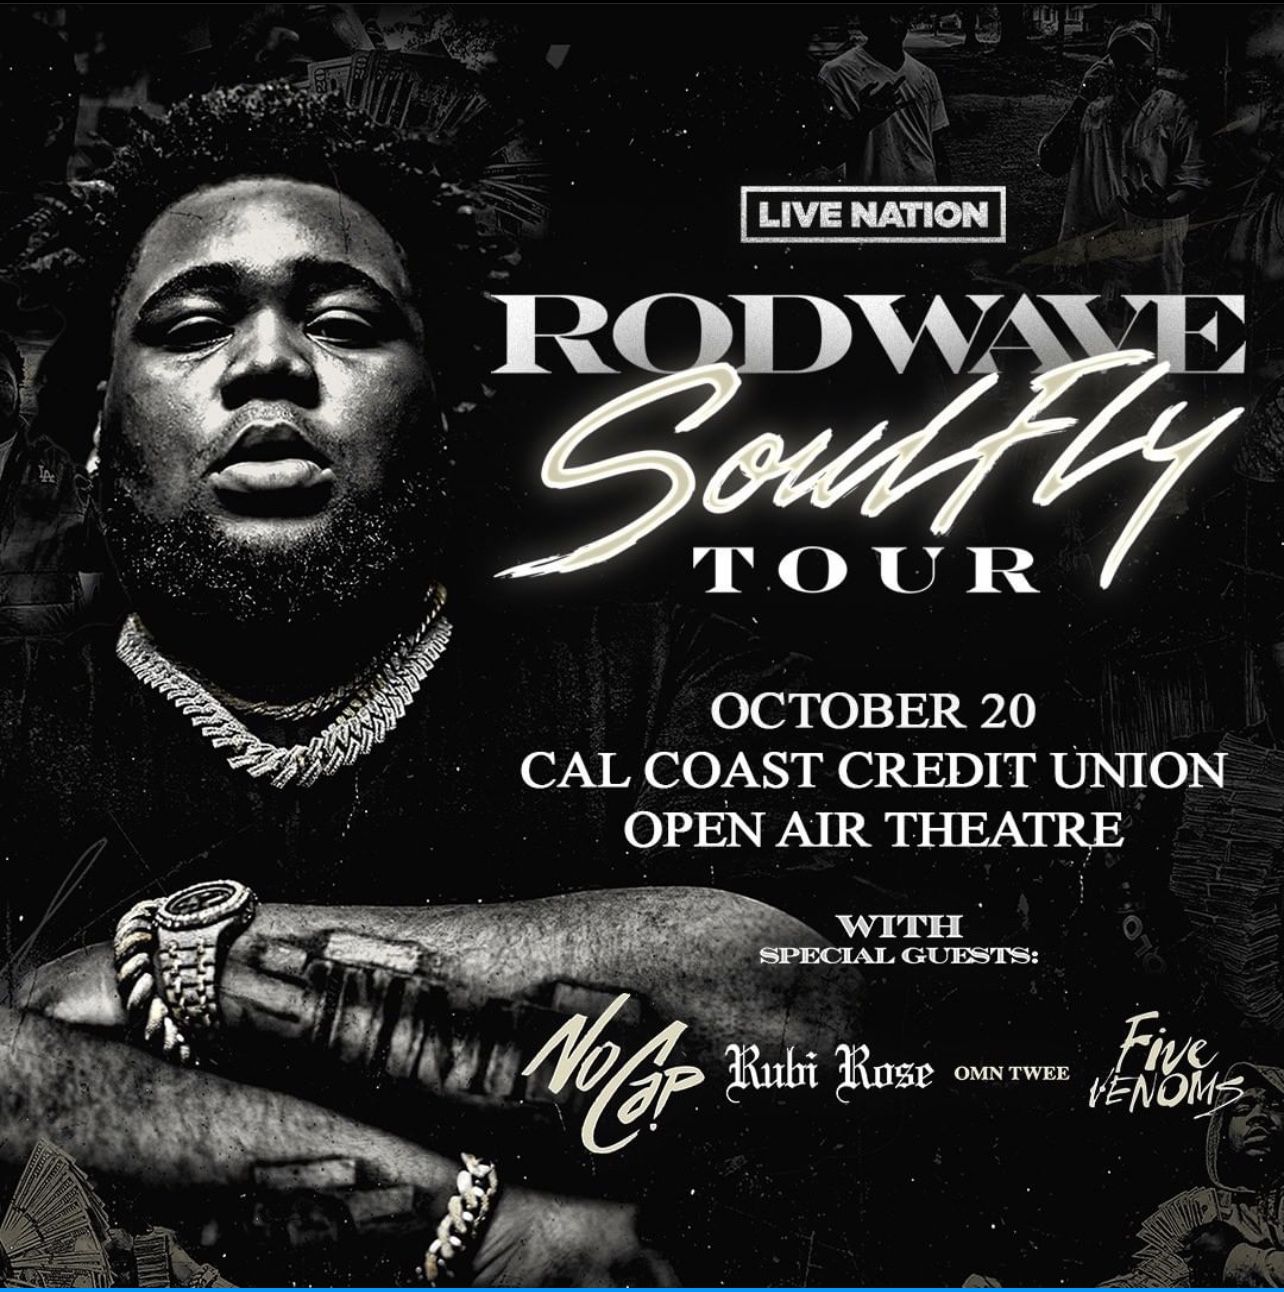 Rod Wave Soul Fly Tour Ticket For Sale !!!